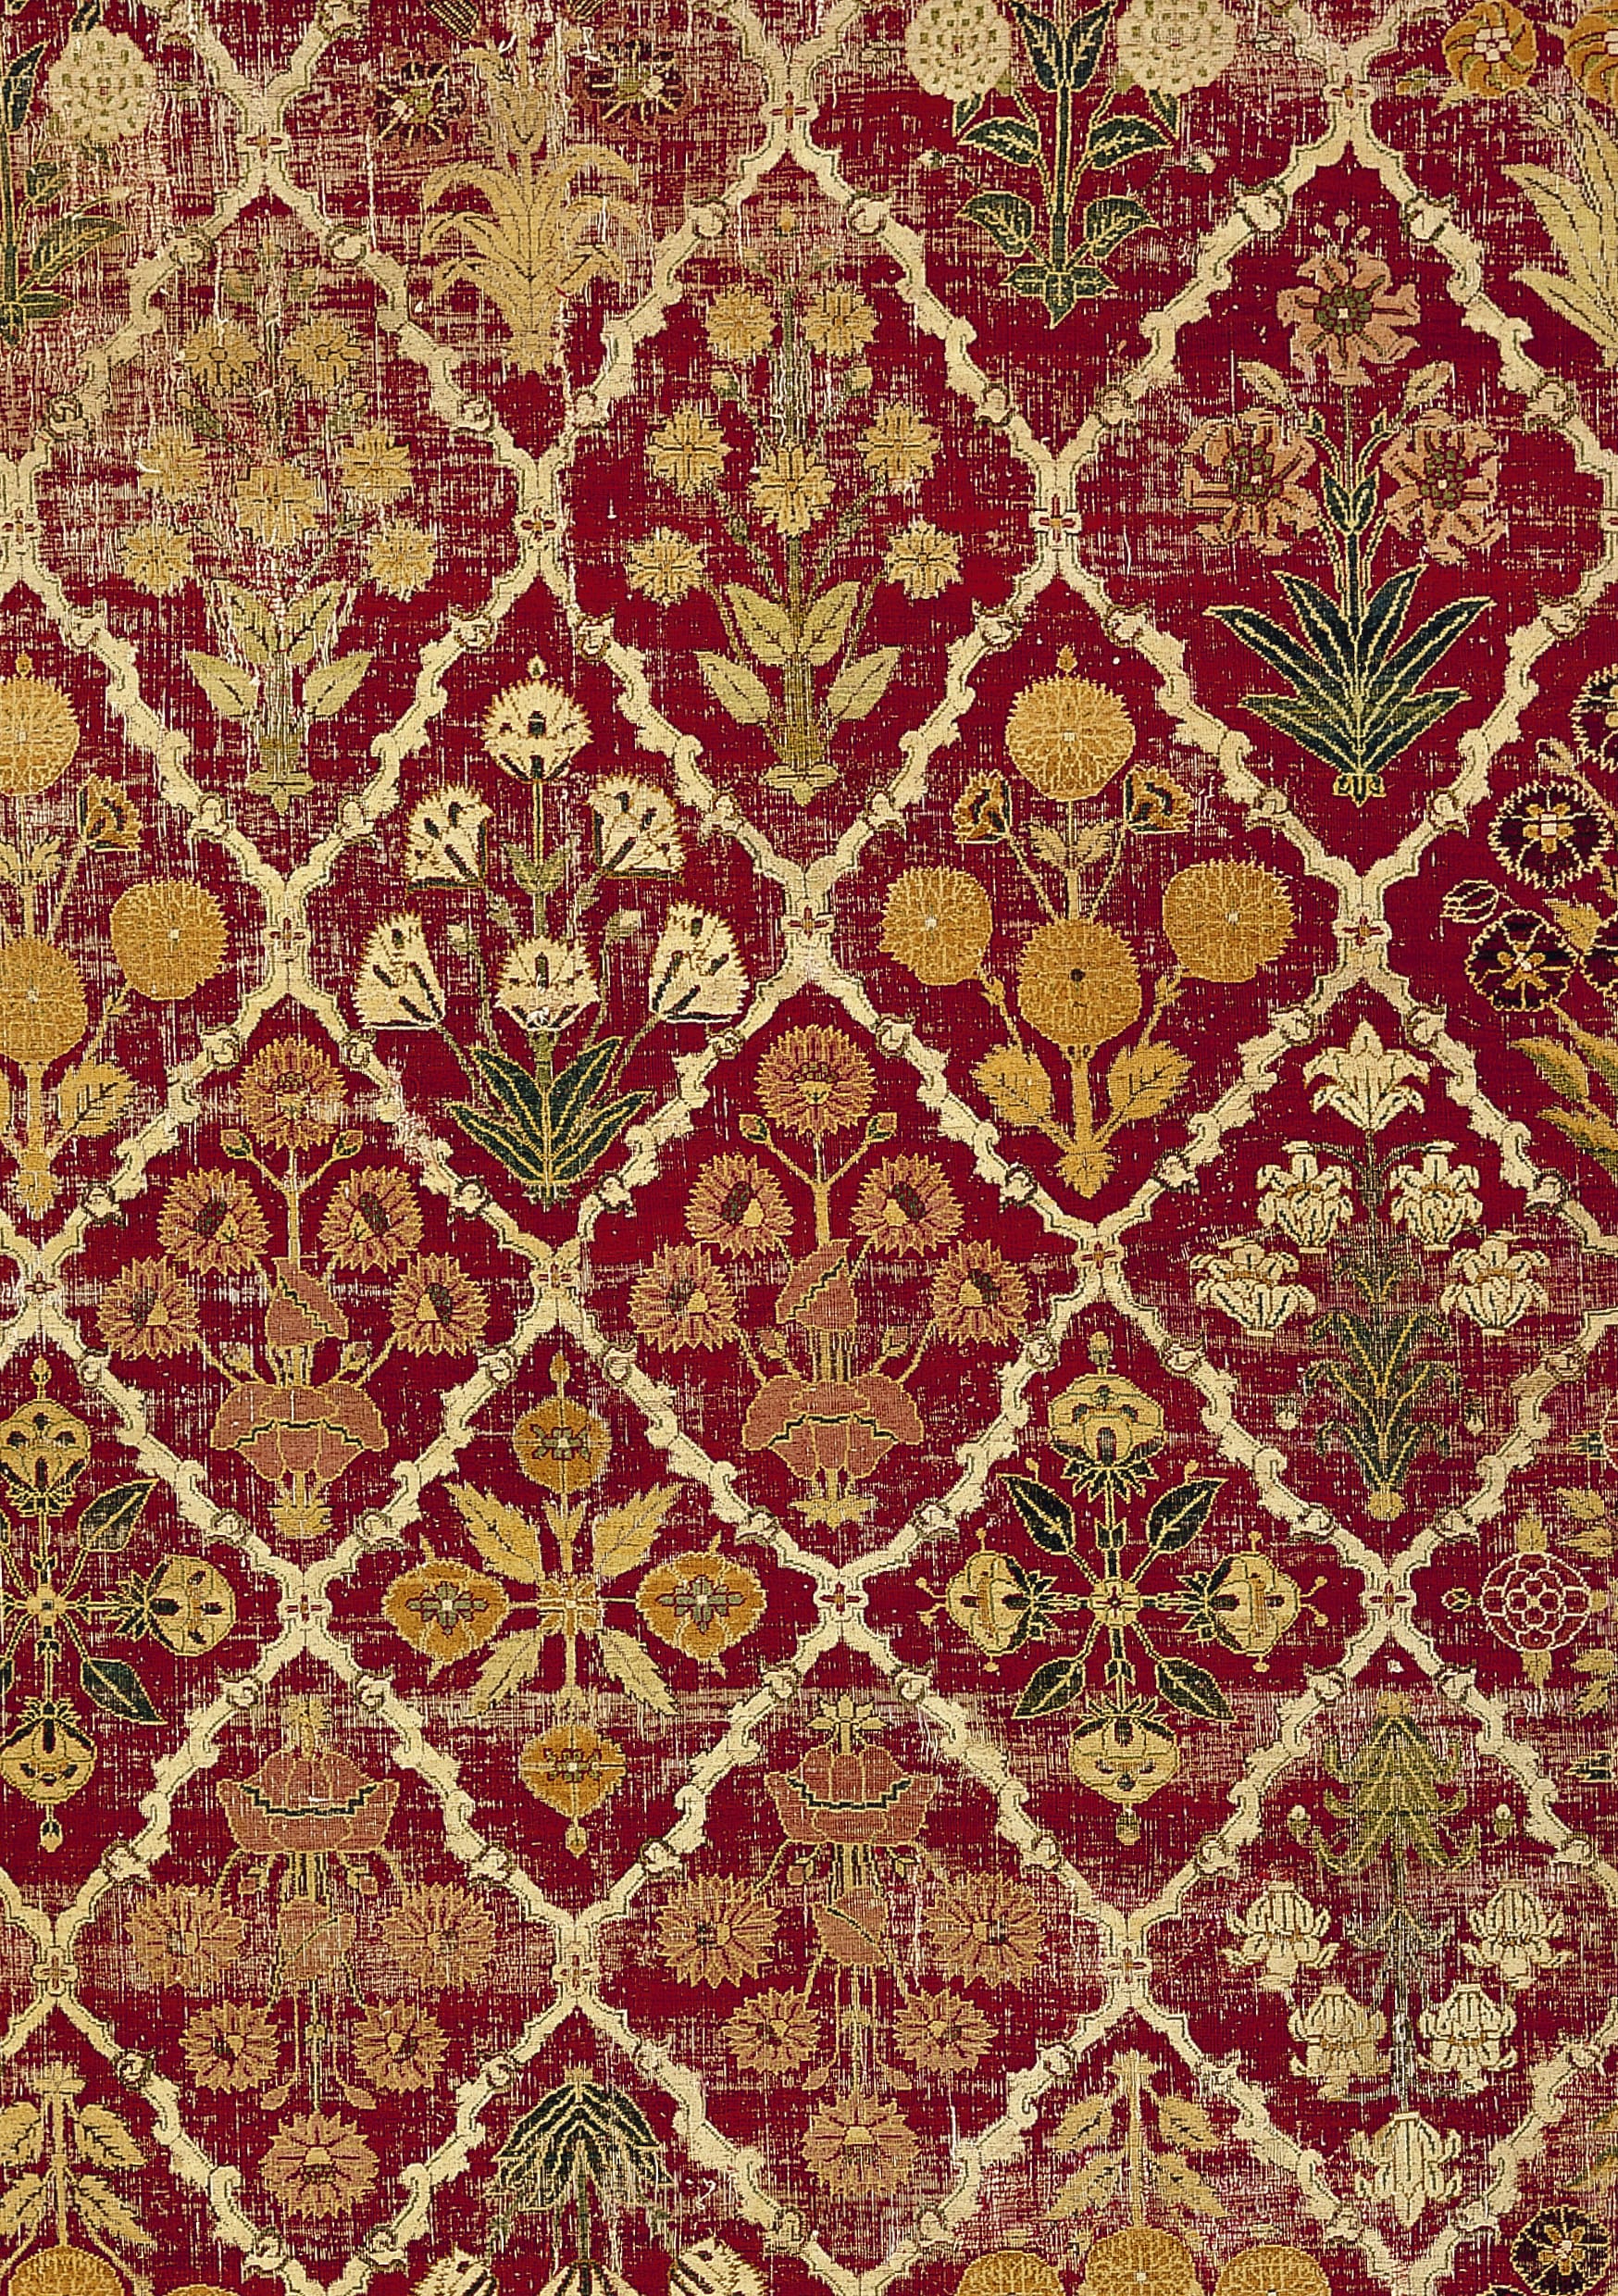 Indian Floral Patterns in Design and Textiles